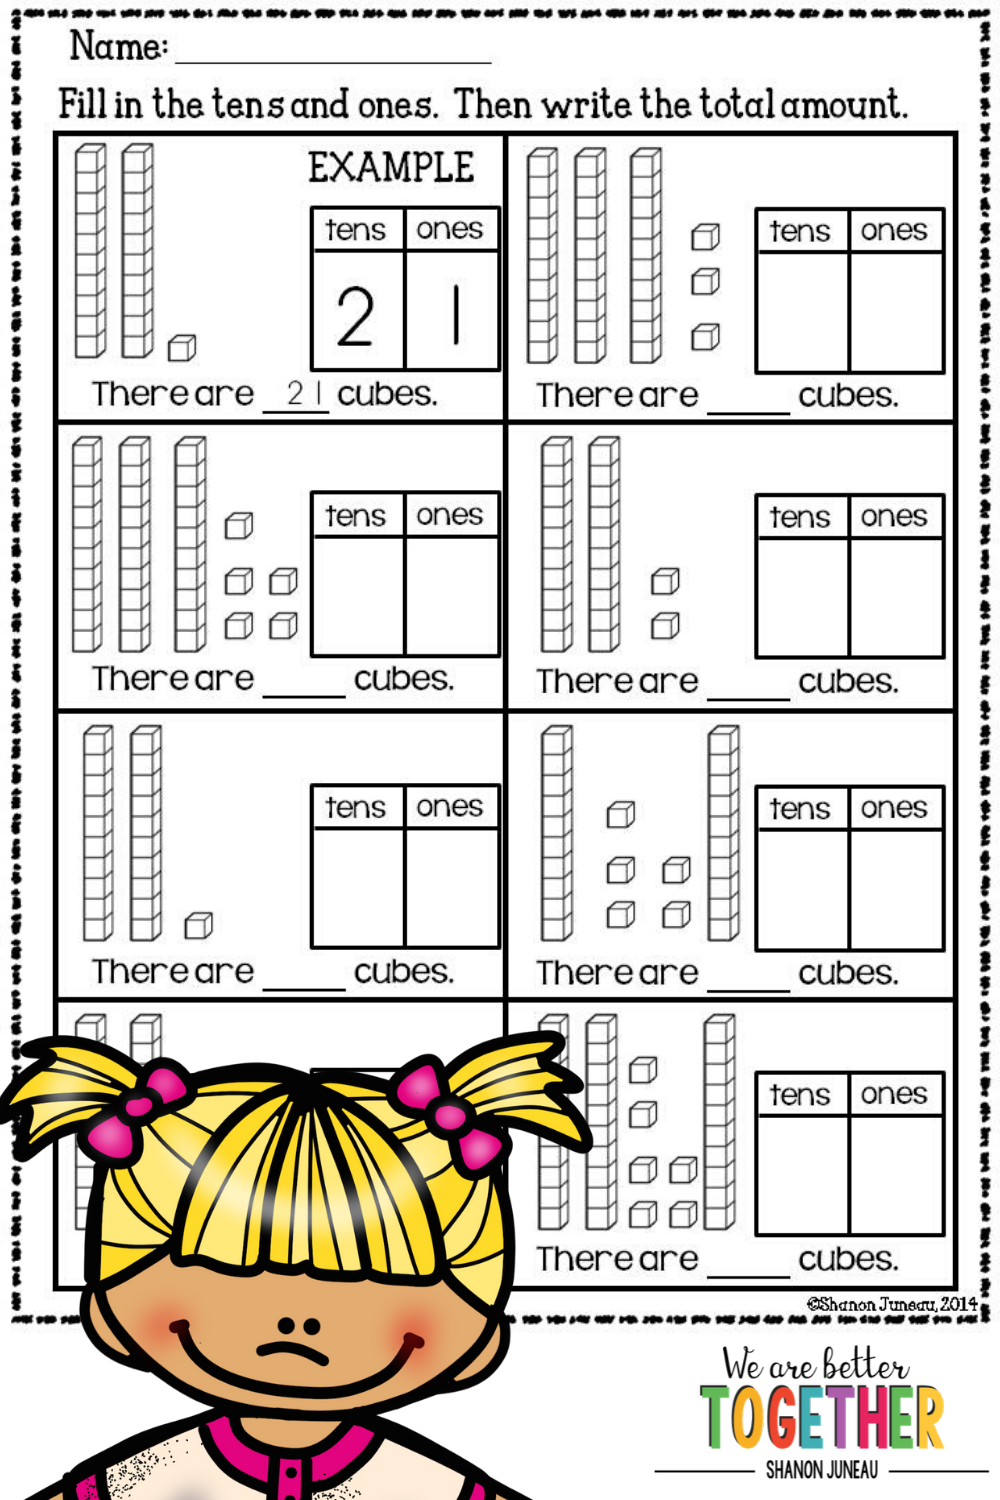 22 1st Grade Worksheets Print Out Edea smith